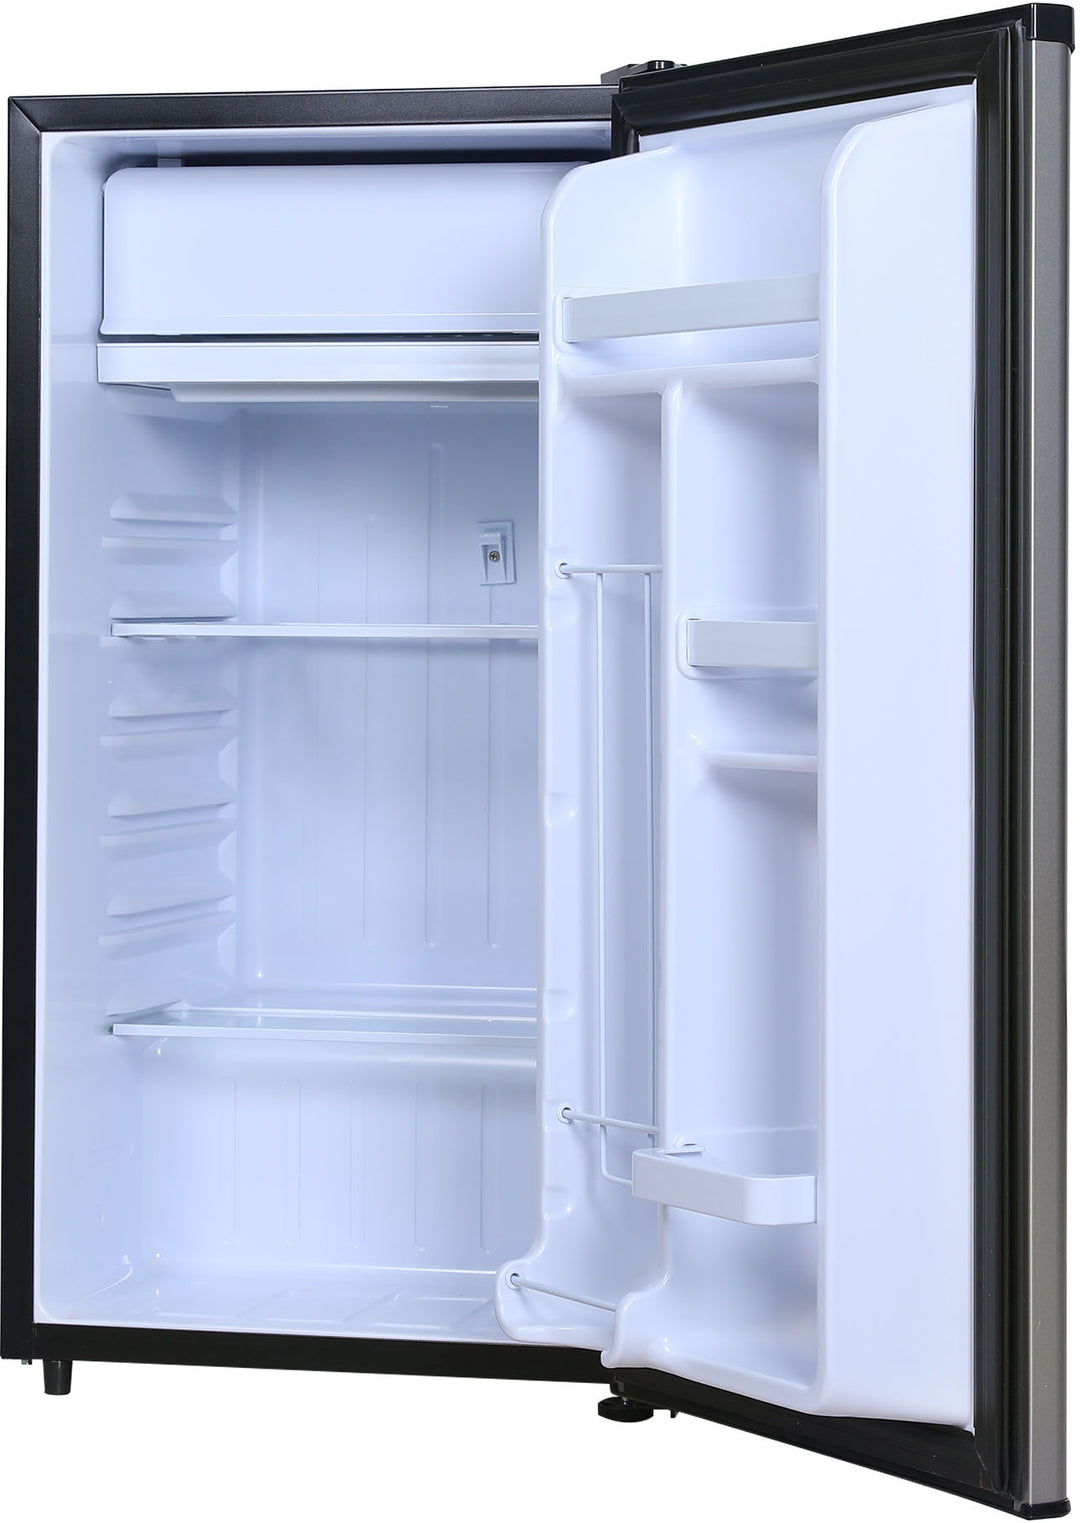 Frigidaire - Platinum Series Retro 3.2 Cu. Ft. Compact Fridge - Stainless with Chrome Trim - Stainless steel_2